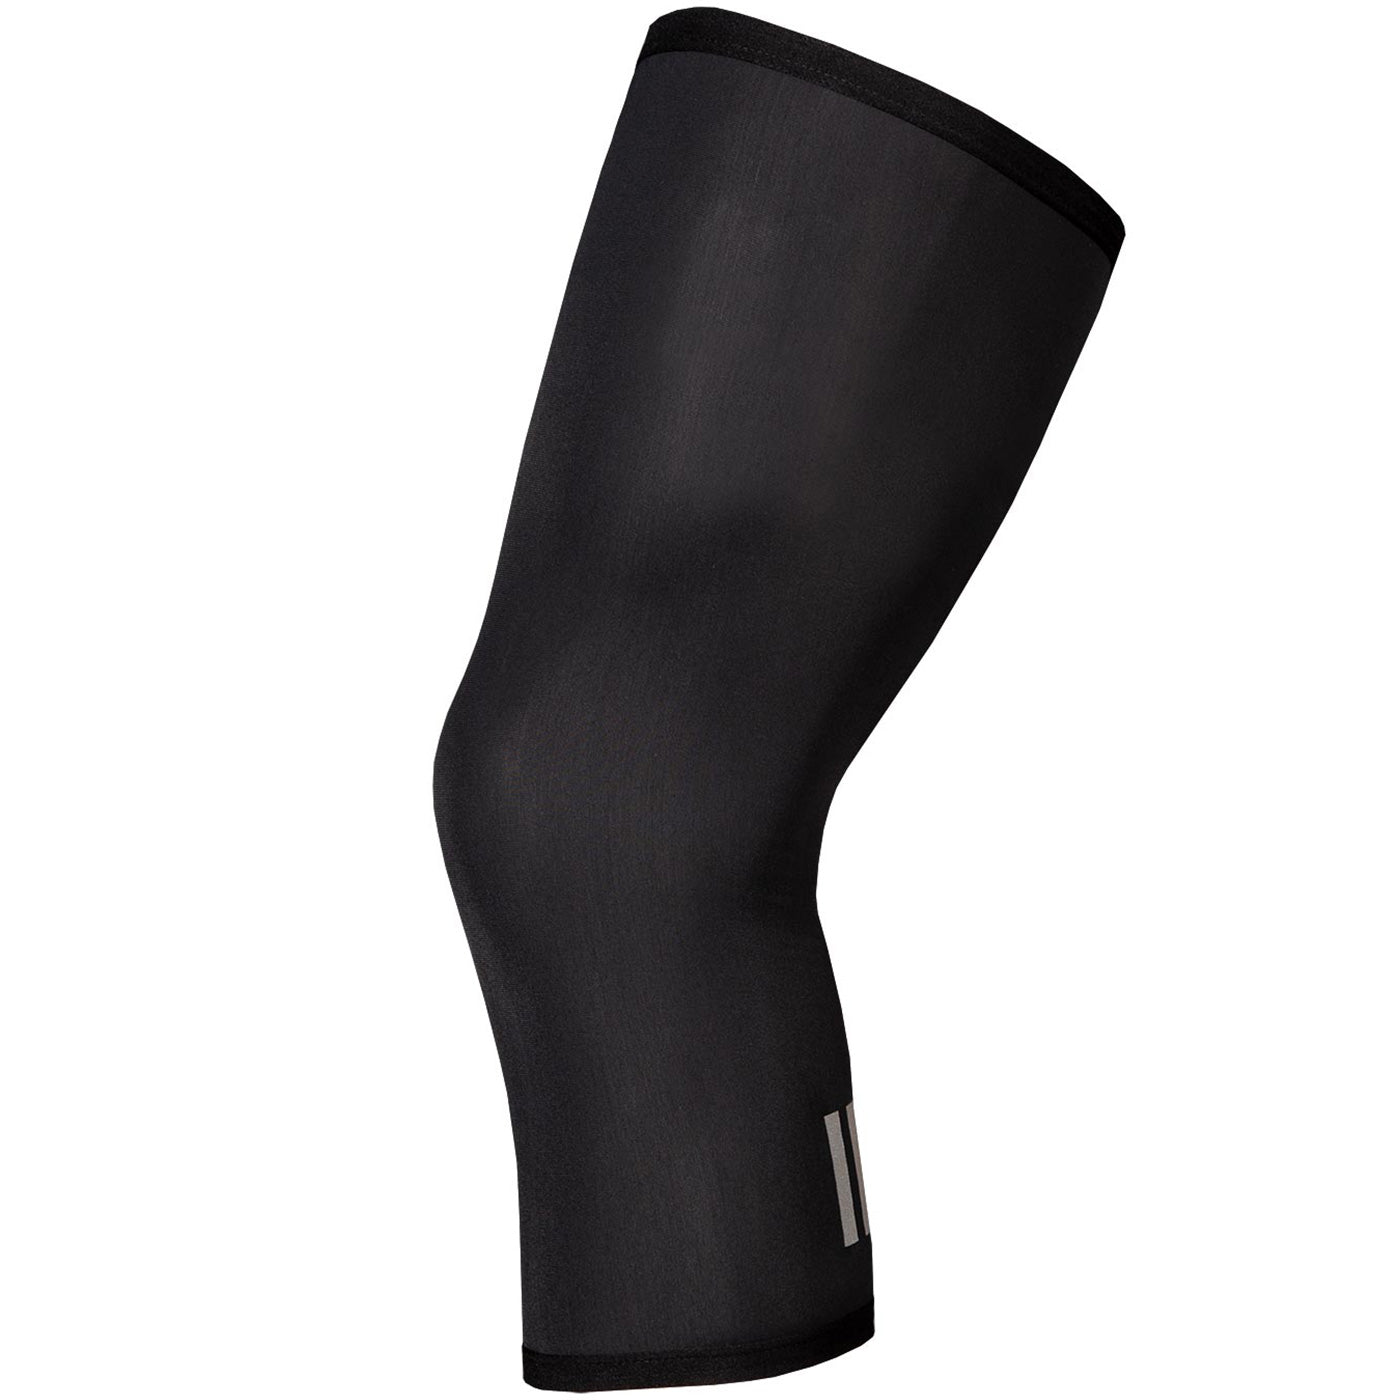 Endura FS260-Pro Thermo knee warmers - Black | All4cycling